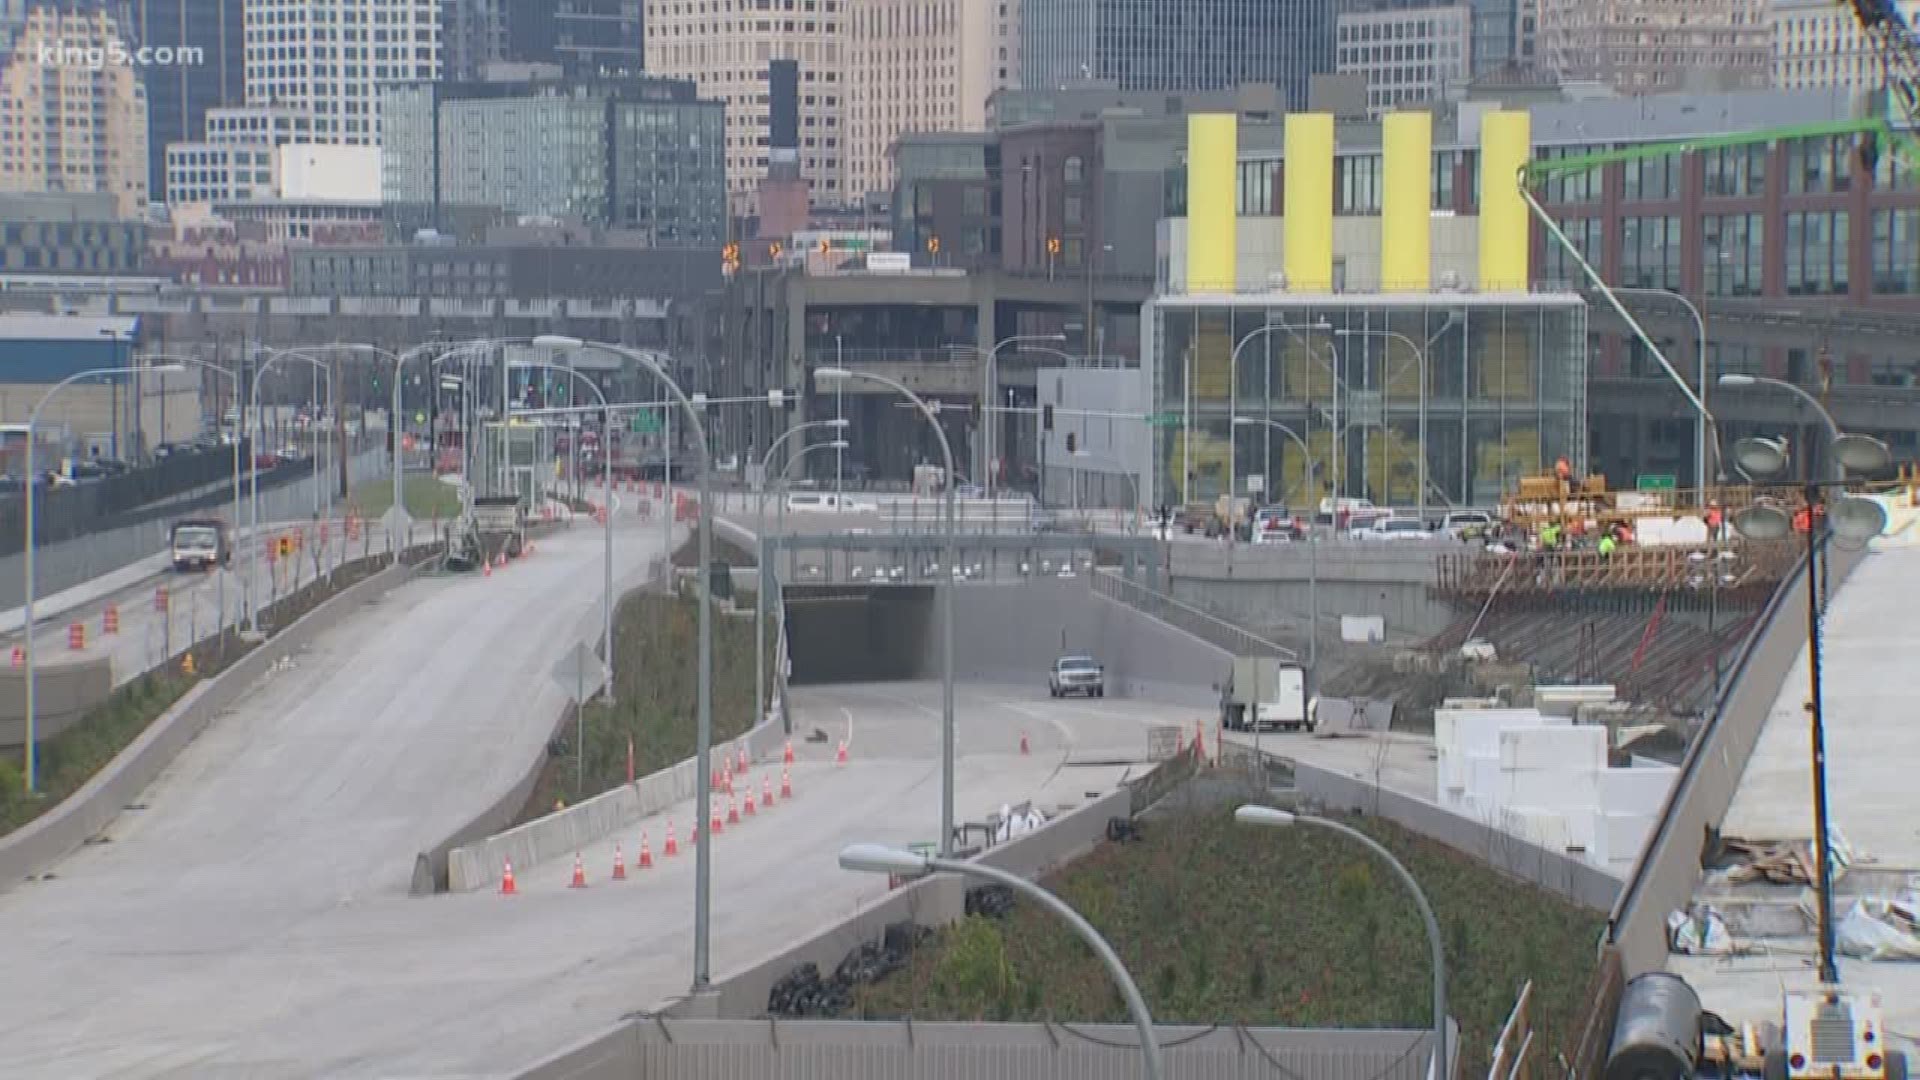 KING 5's Glenn Farley takes a look at how construction is going on the new 99 tunnel ramps.